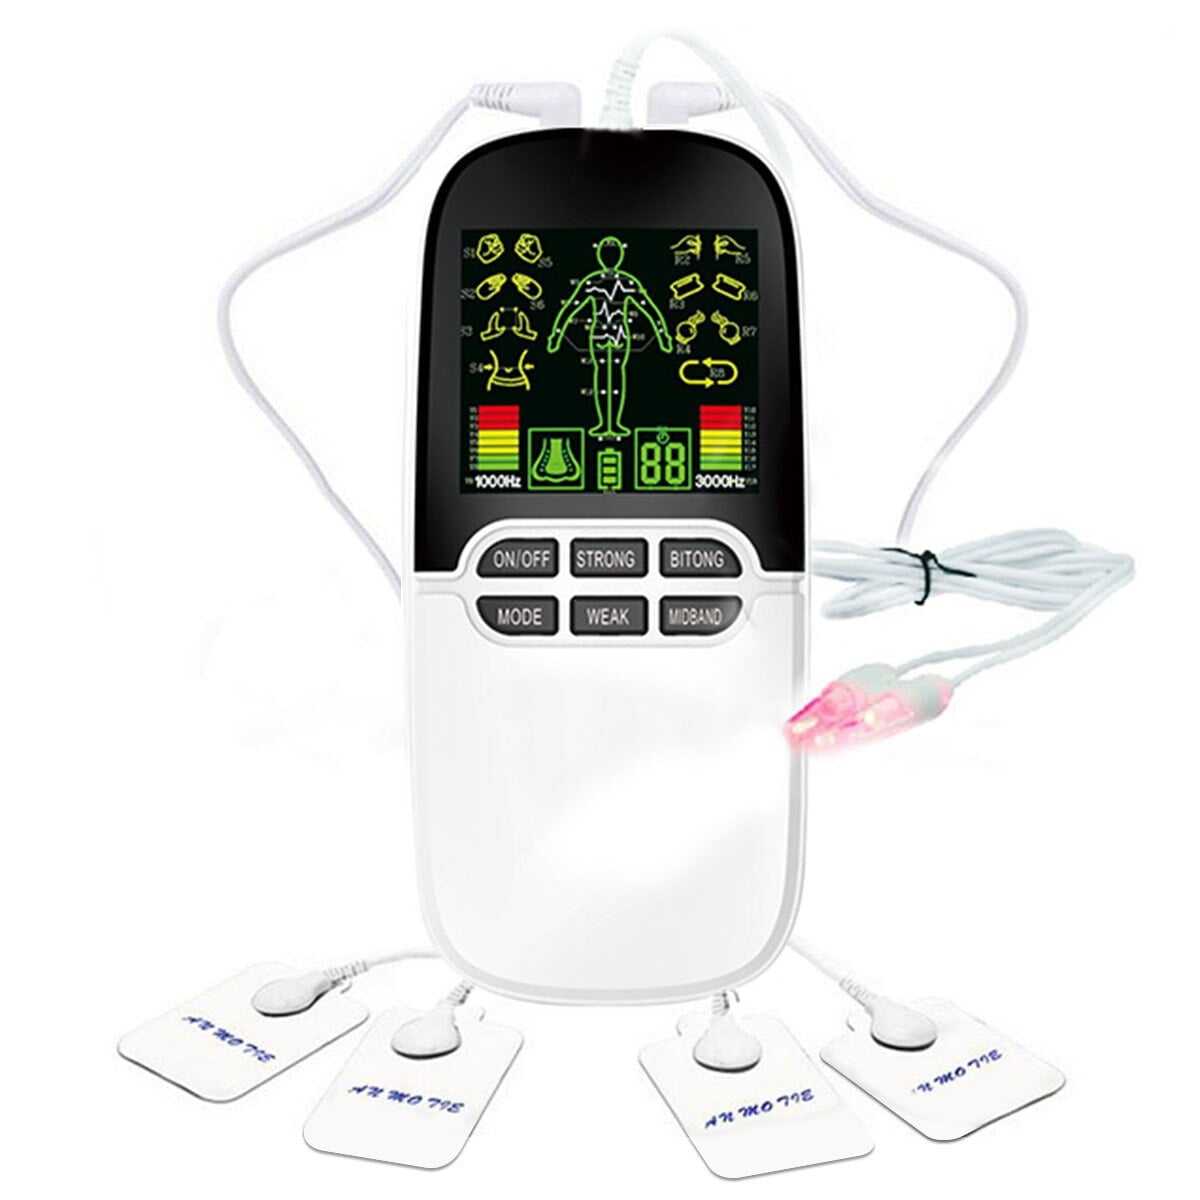 EMS 7500 Muscle Stimulator Dual Channel Relieve Low Back Pain